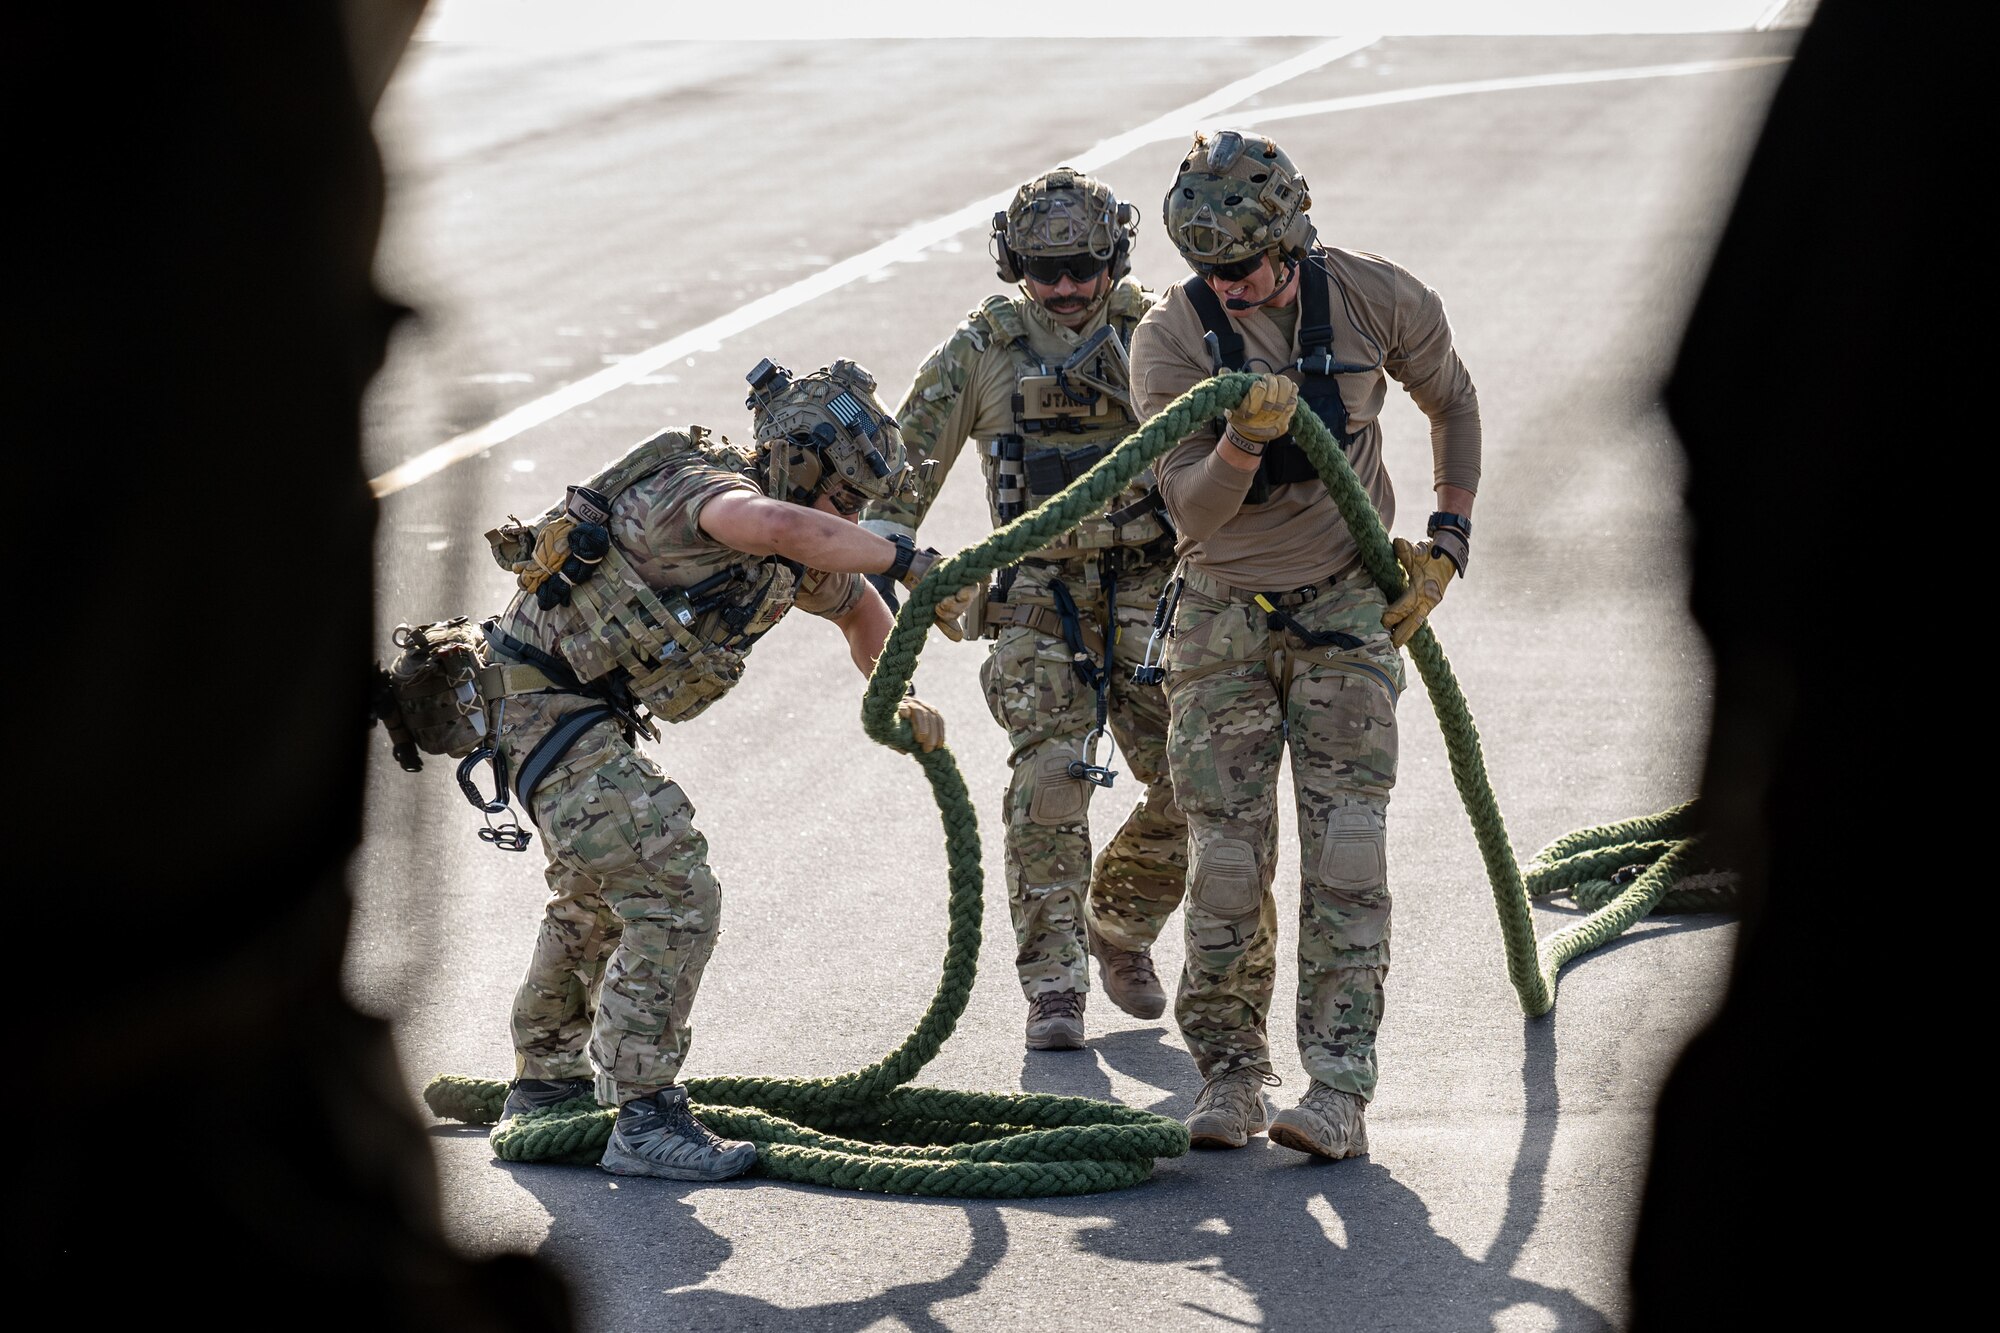 Three Airmen in uniforms hold a fast rope on a runway.